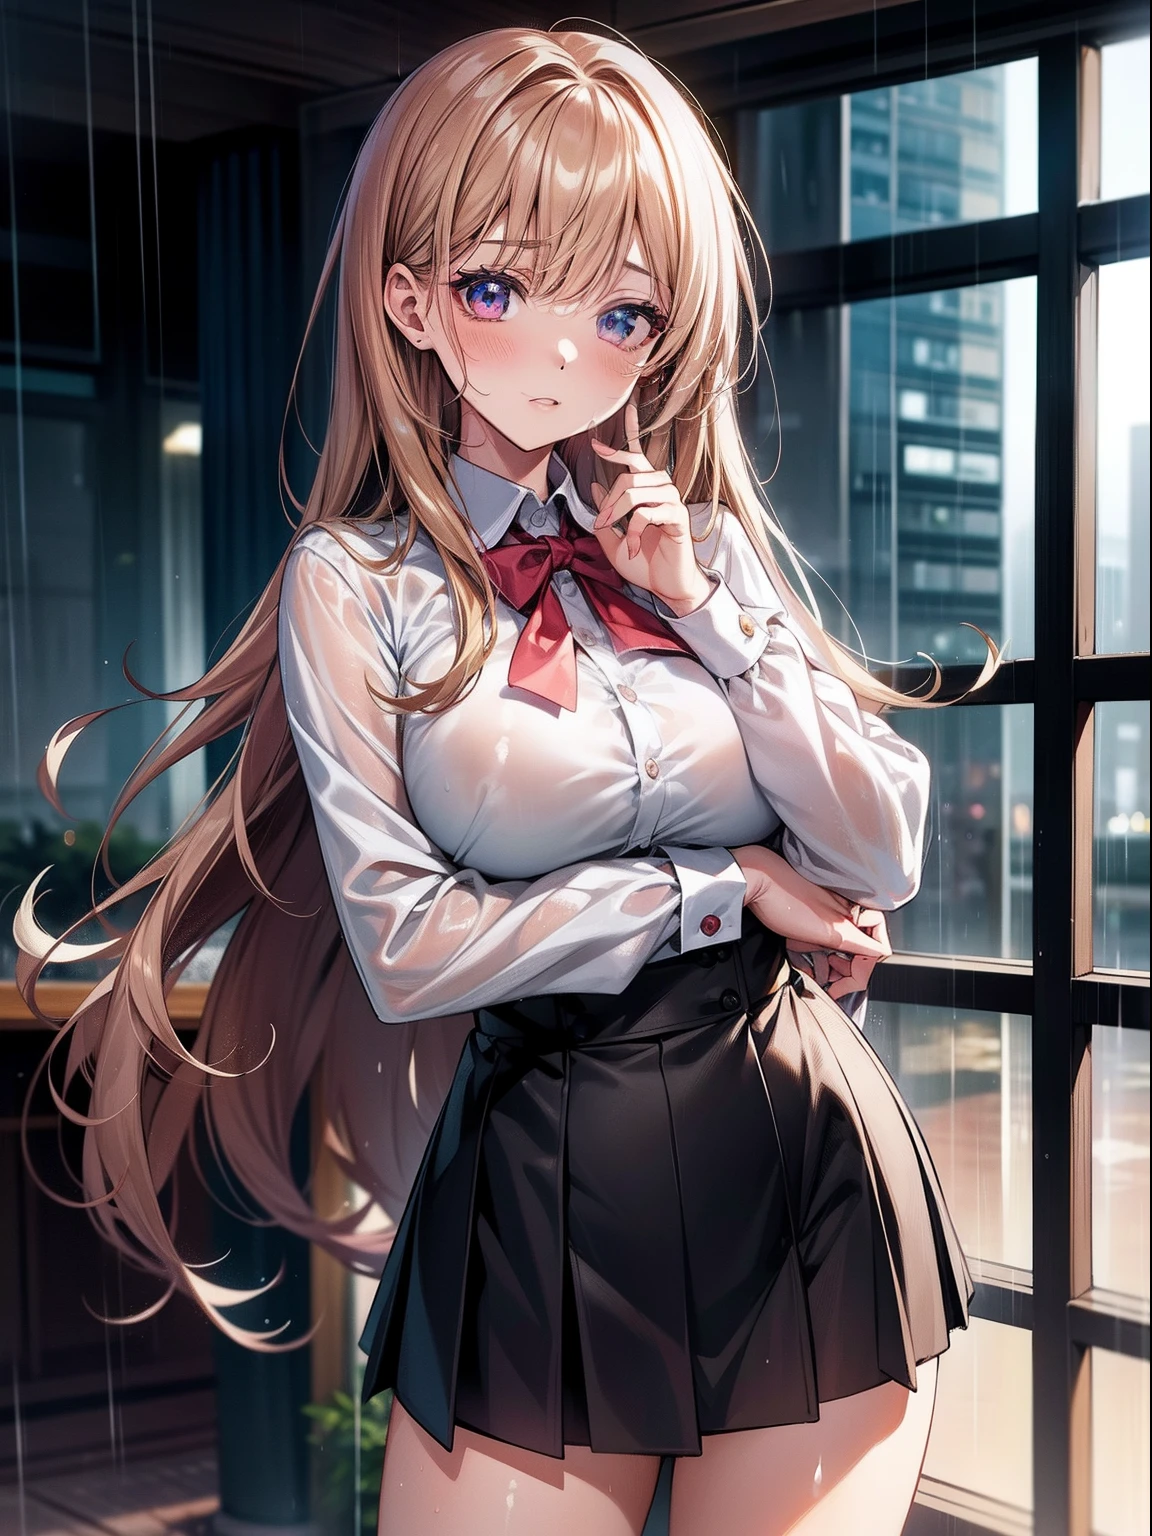 masutepiece, High resolution, 8k, anime woman, Delicate and detailed writing 、Detailed digital illustration、Very long hair and shiny、bangs、a very beautiful woman、Eyes are double, Large, Bust is D cup、High image quality, High quality、Detailed background、Wearing a student uniform、early evening、rain is falling、Rain-soaked hair、Uniform wet in the rain、The inside of the eye shines like a diamond、4 fingers, 1 thumb、Detailed female face、I'm embarrassed、Very beautiful and cute woman、、Detailed background、​masterpiece、Soft Focus , Bright gradient watercolor , Lens Flare , glitter , Glow , Dreamy , light brown hair、Wet in the rain, Clothes that cling to the body and pale pink bras can be seen through、Heavy rain background、Beautiful water background、a miniskirt、Cute in anime、Very beautiful interior background、Heavy rain can be seen from the window